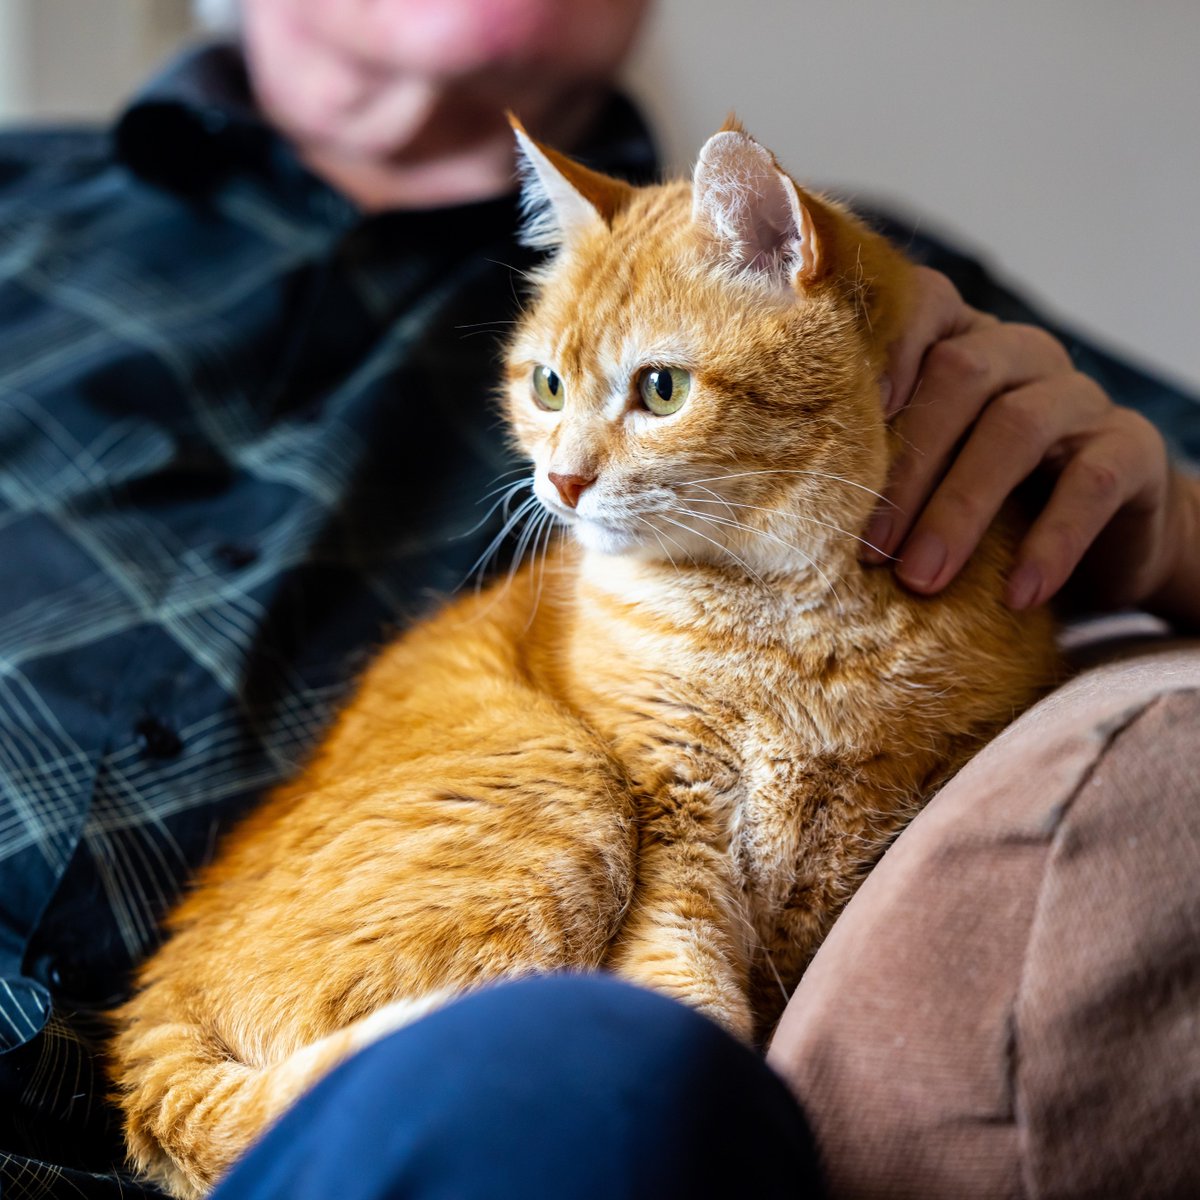 Has your cat gone missing, and you’ve been reunited thanks to their microchip? We’re looking for stories! If they were found miles away or reunited after years and you’re happy to share your story, please email our Media team: media.office@cats.org.uk.